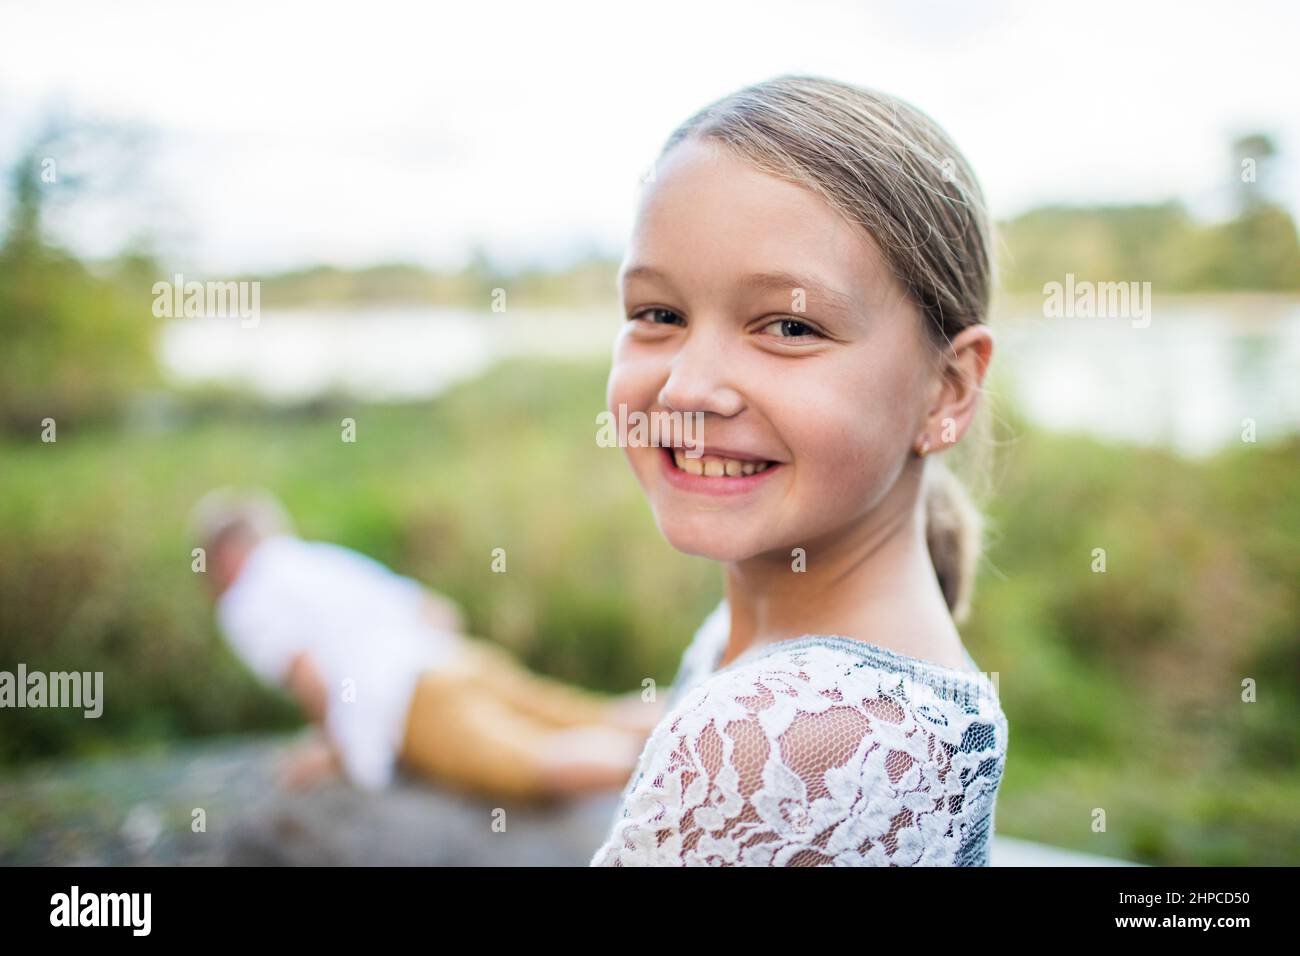 Portrait of smiling young vibrant woman. Stock Photo